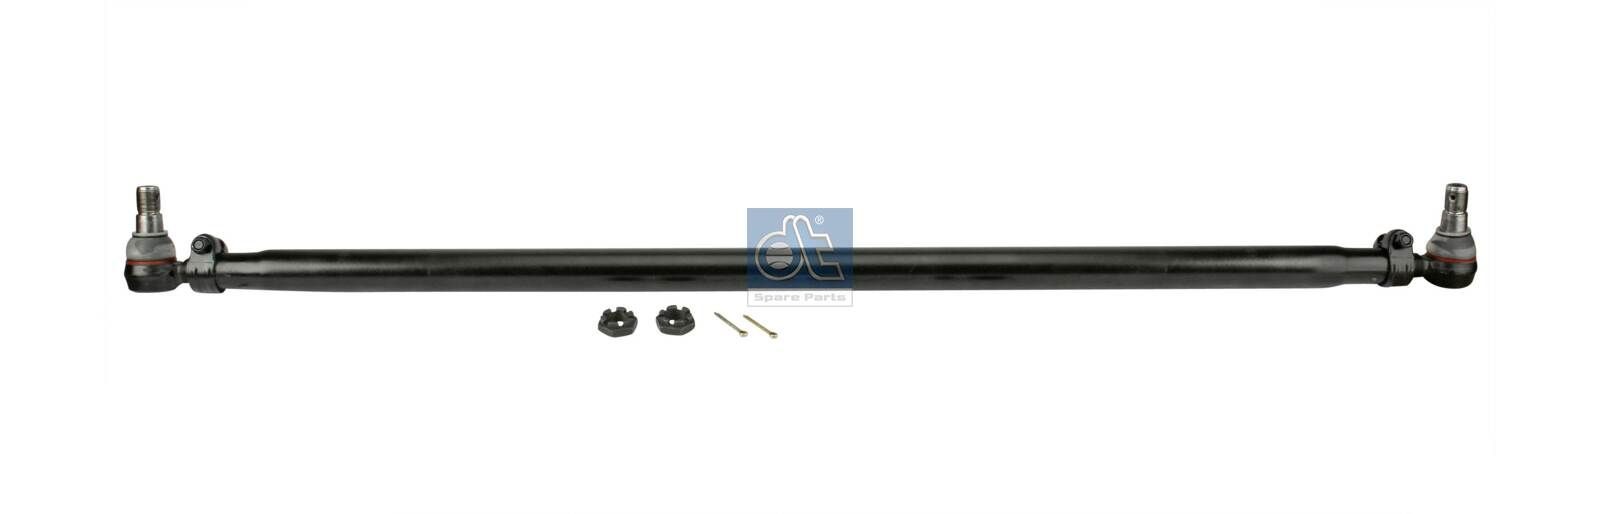 DT Spare Parts 4.62874 Rod Assembly A 949 330 18 03